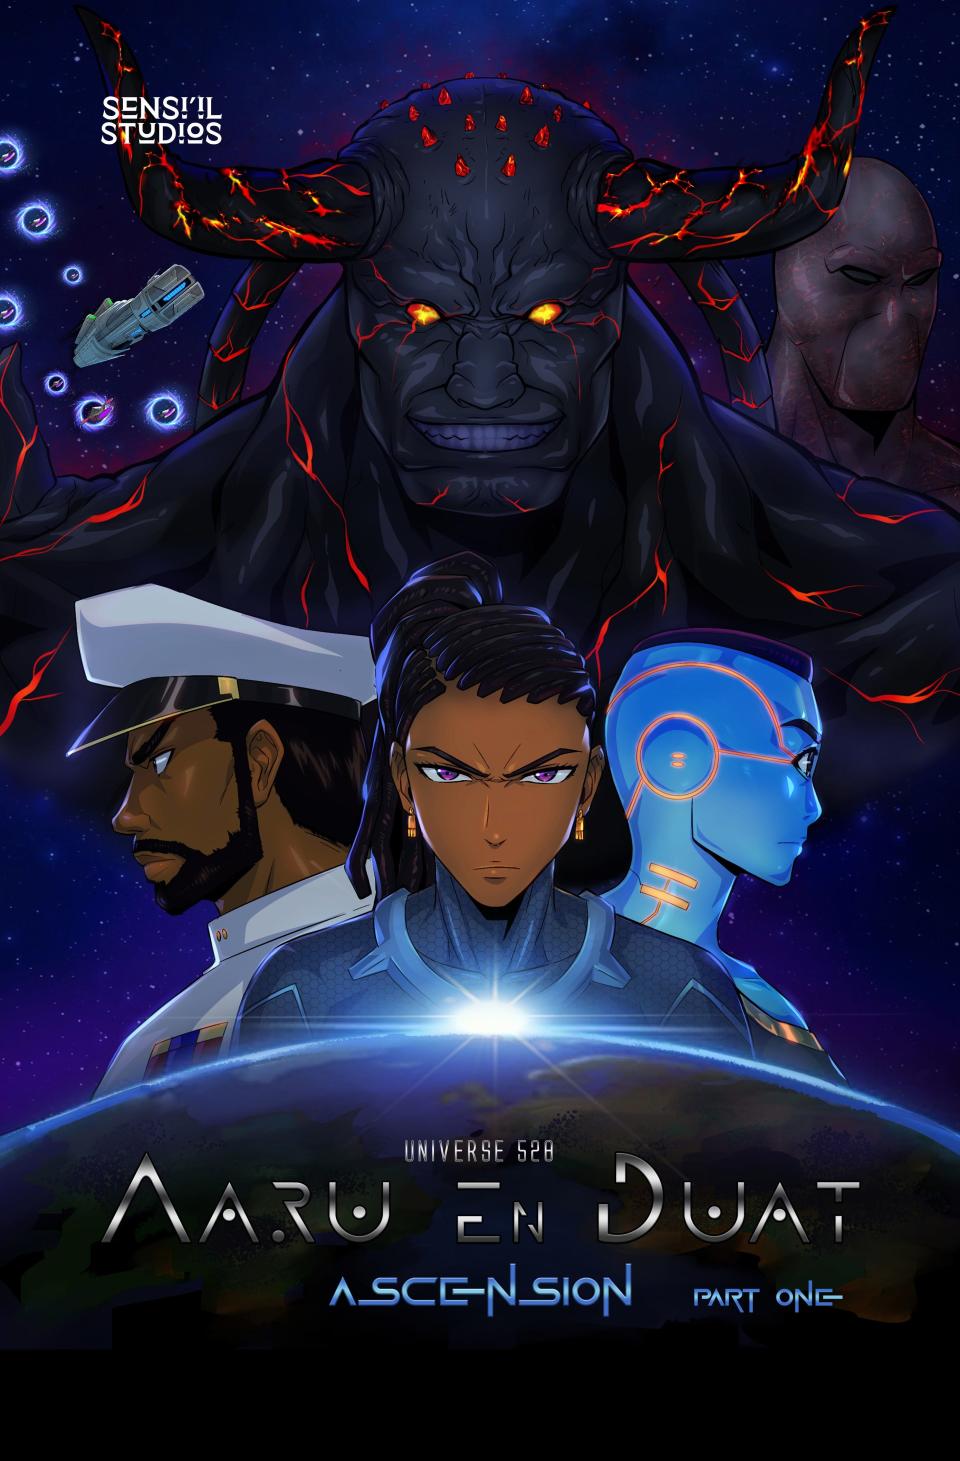 "Aaru En Duat: Ascension (Part 1)" is a new book scheduled for publication in June 2023 by Sensi'il Studios LLC, Iowa's first Black-owned comic book company.